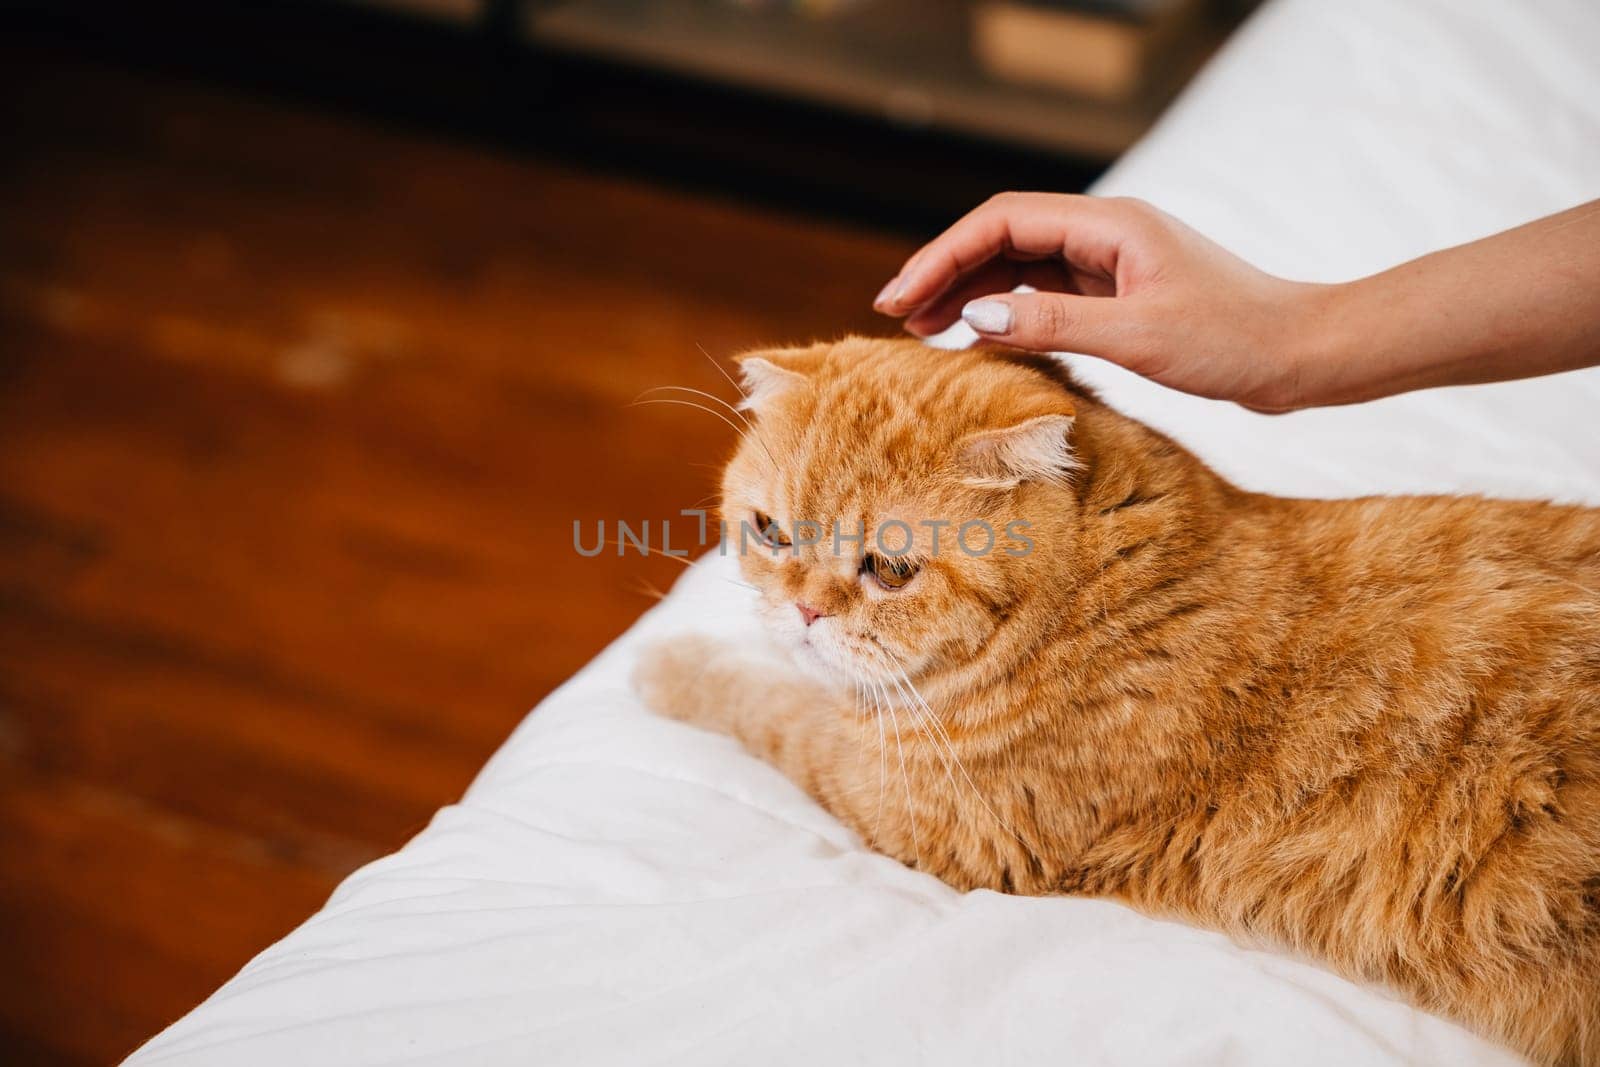 On the bed in their room, a woman finds relaxation and happiness while stroking her orange Scottish Fold cat. Their bond reflects the care and support they share. Pat love by Sorapop